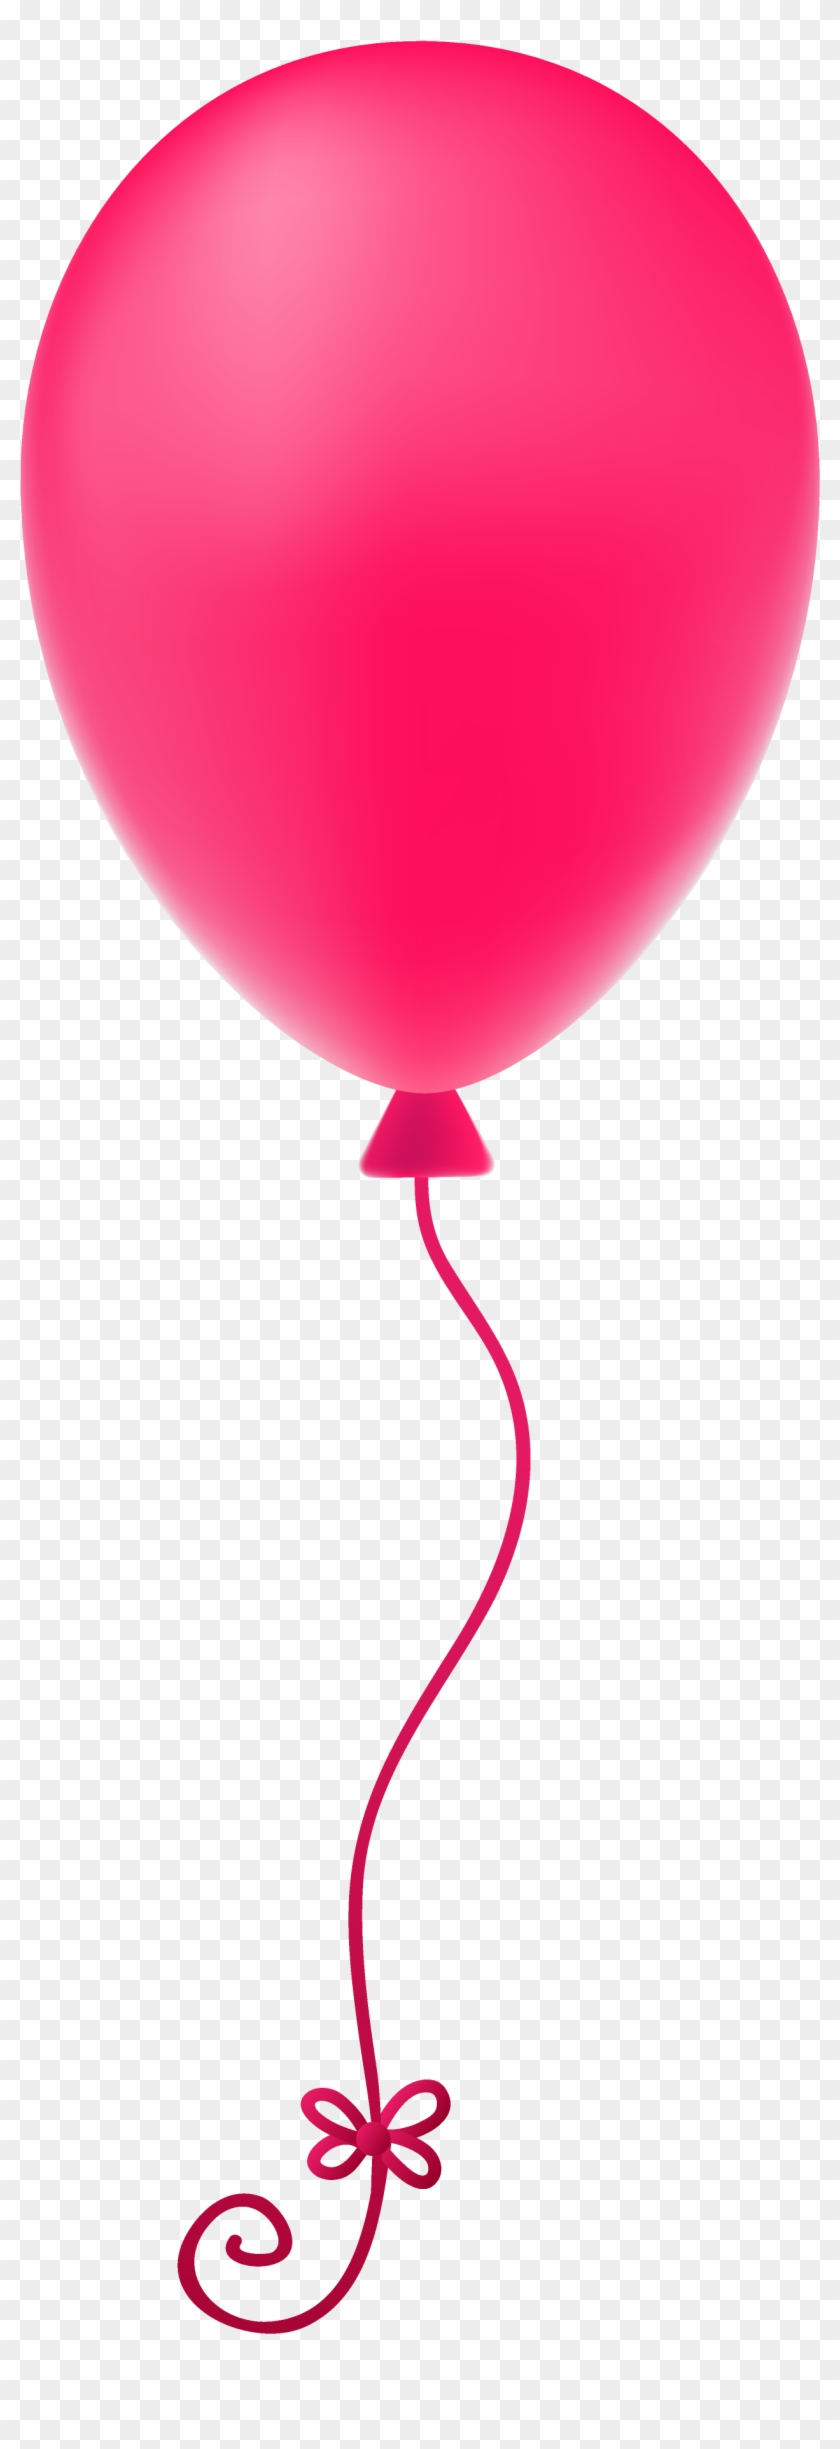 Pink Balloon Png Image Png Transparent Best Stock Photos - Pink Balloon Png Transparent Background Clipart #605009